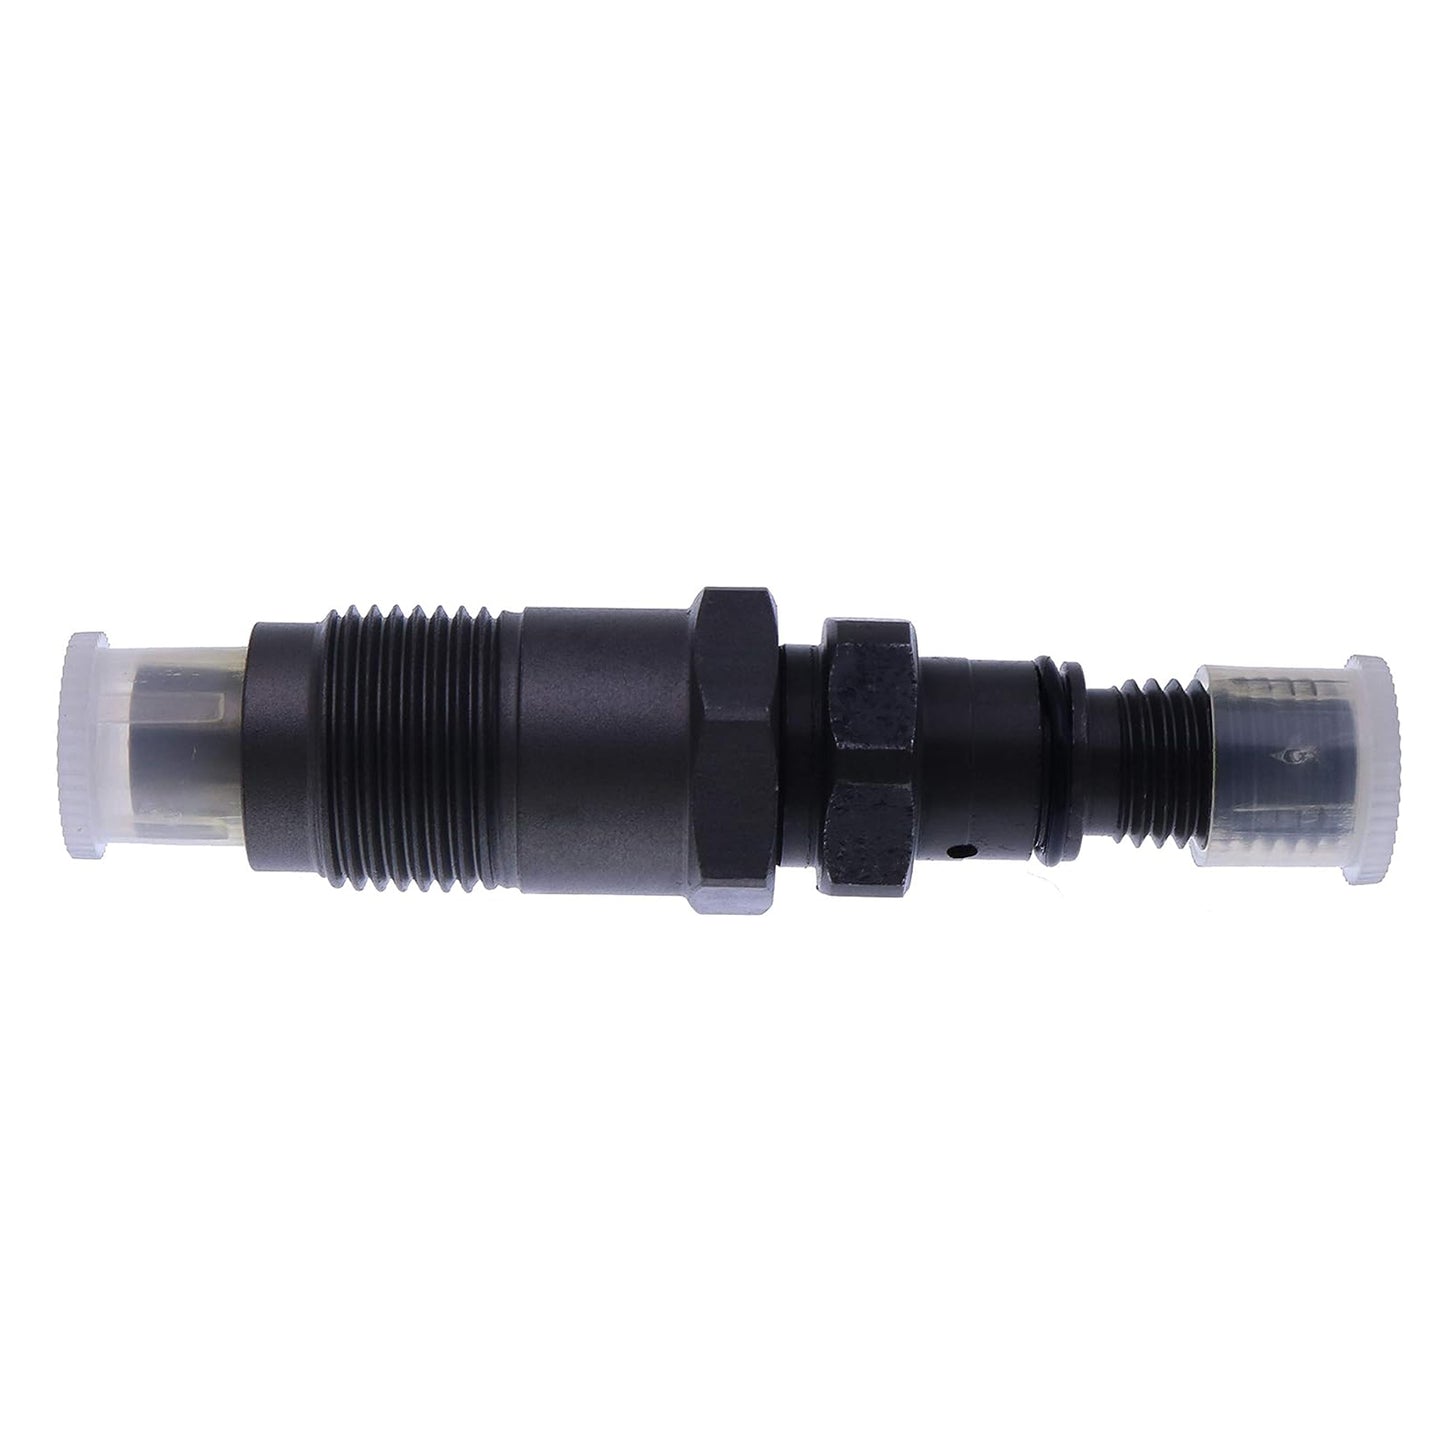 AM879688 Fuel Injector Compatible With John Deere 1435 2210 2243 2500 2500A 2500E 2653A